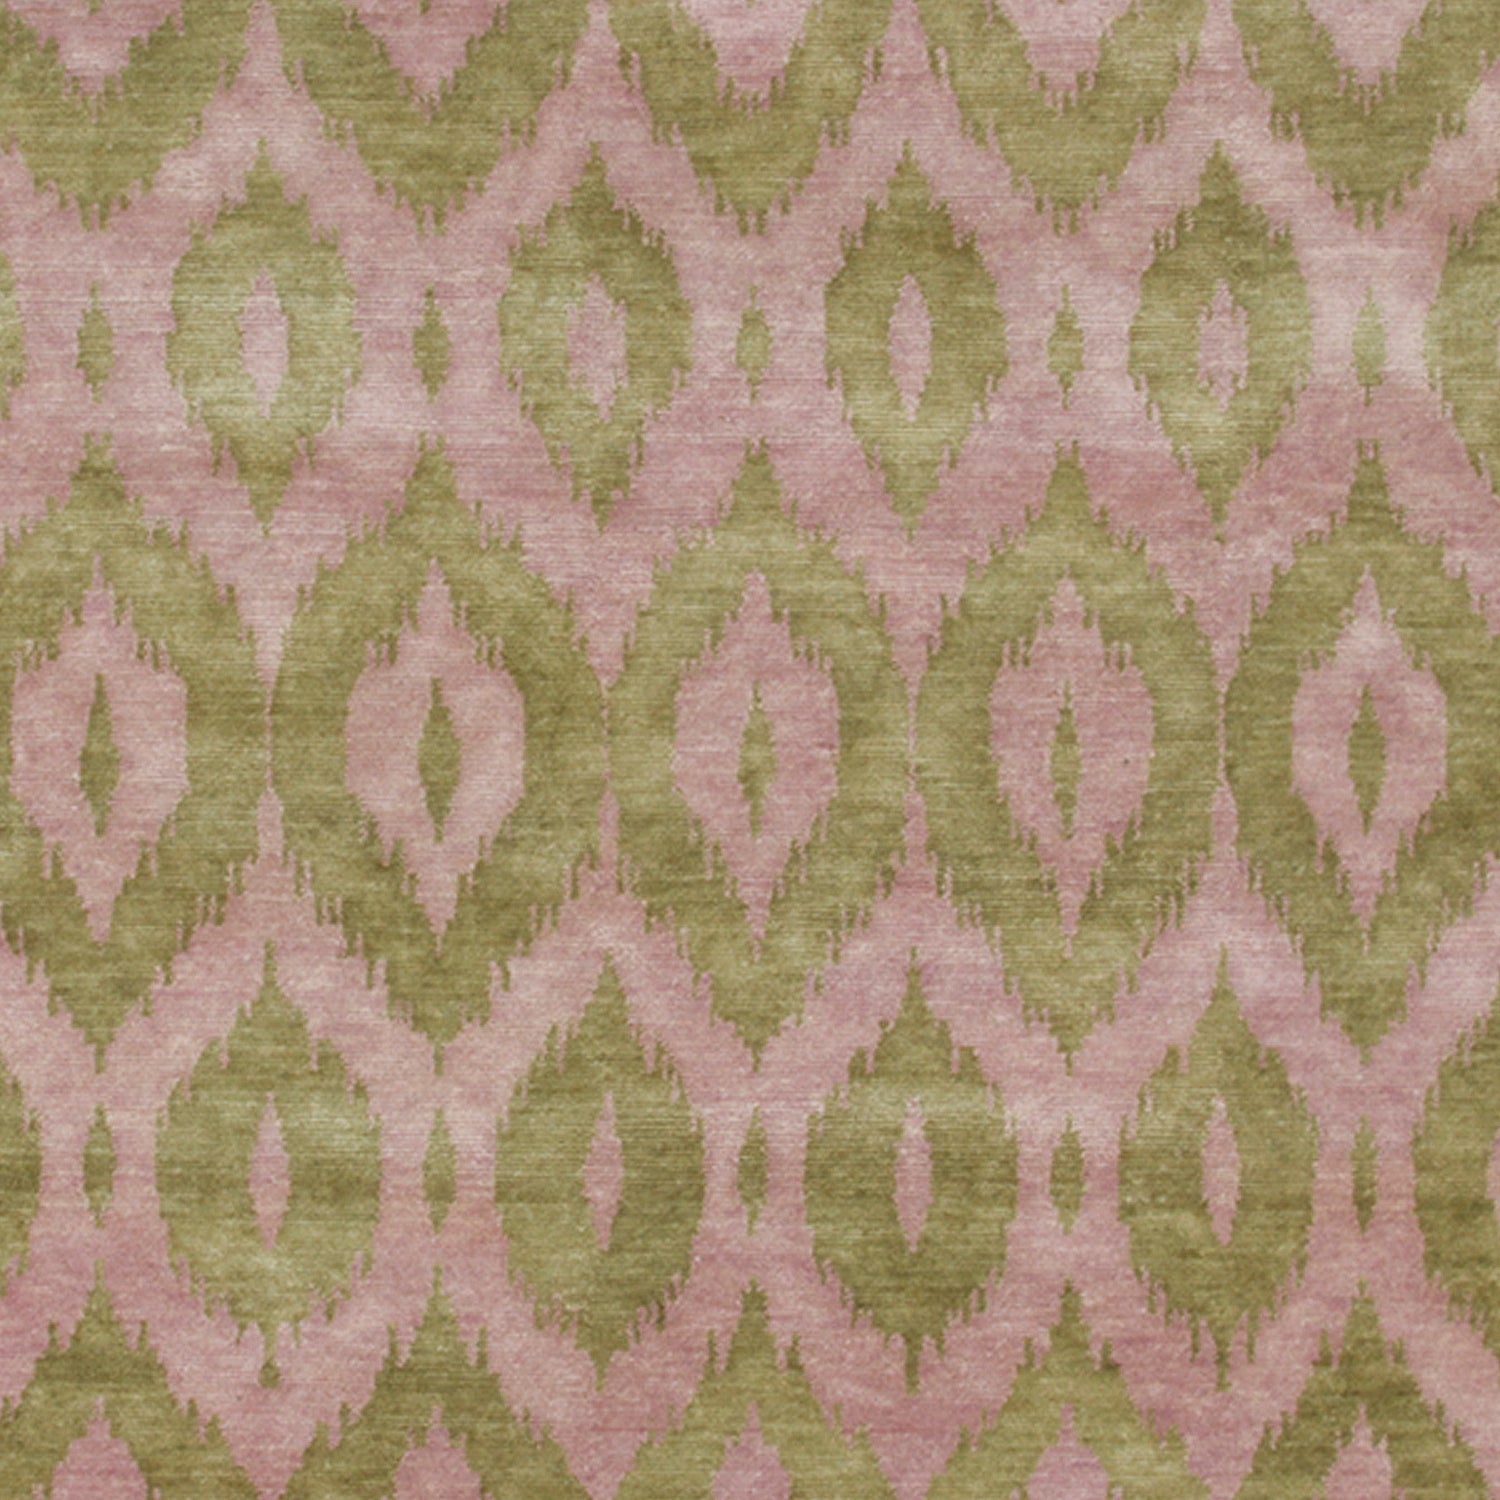 Detail of a woven rug with a green and mauve ikat diamond motif.